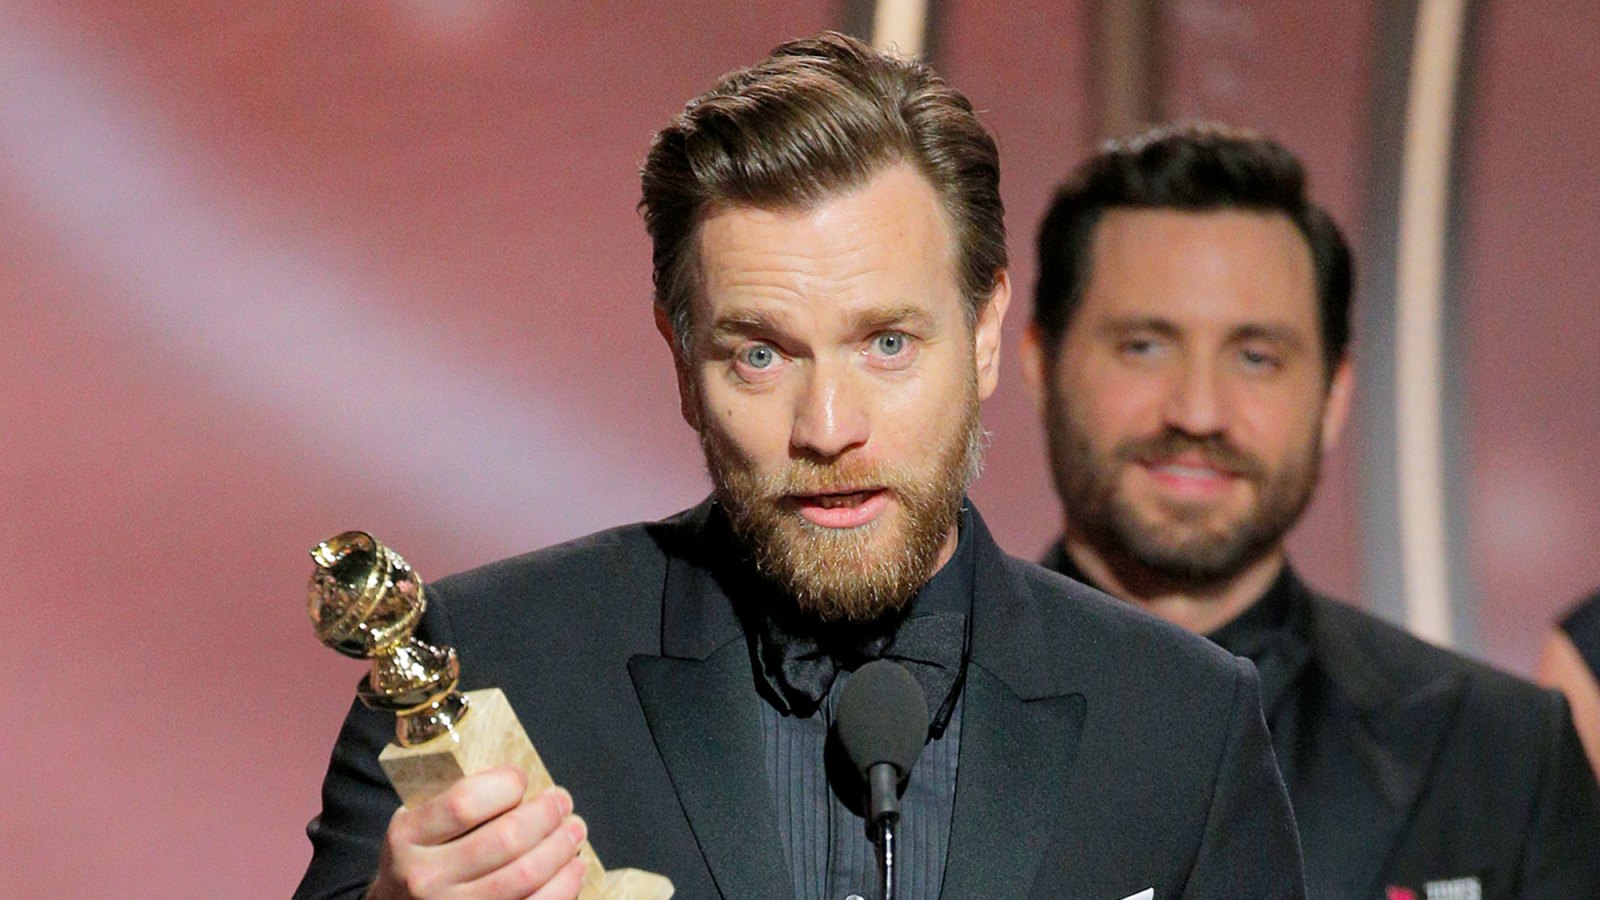 Ewan McGregor accepts the award for Best Performance by an Actor in a Limited Series or Motion Picture Made for Television for “Fargo” during the 75th Annual Golden Globe Awards at The Beverly Hilton Hotel on January 7, 2018 in Beverly Hills, California.